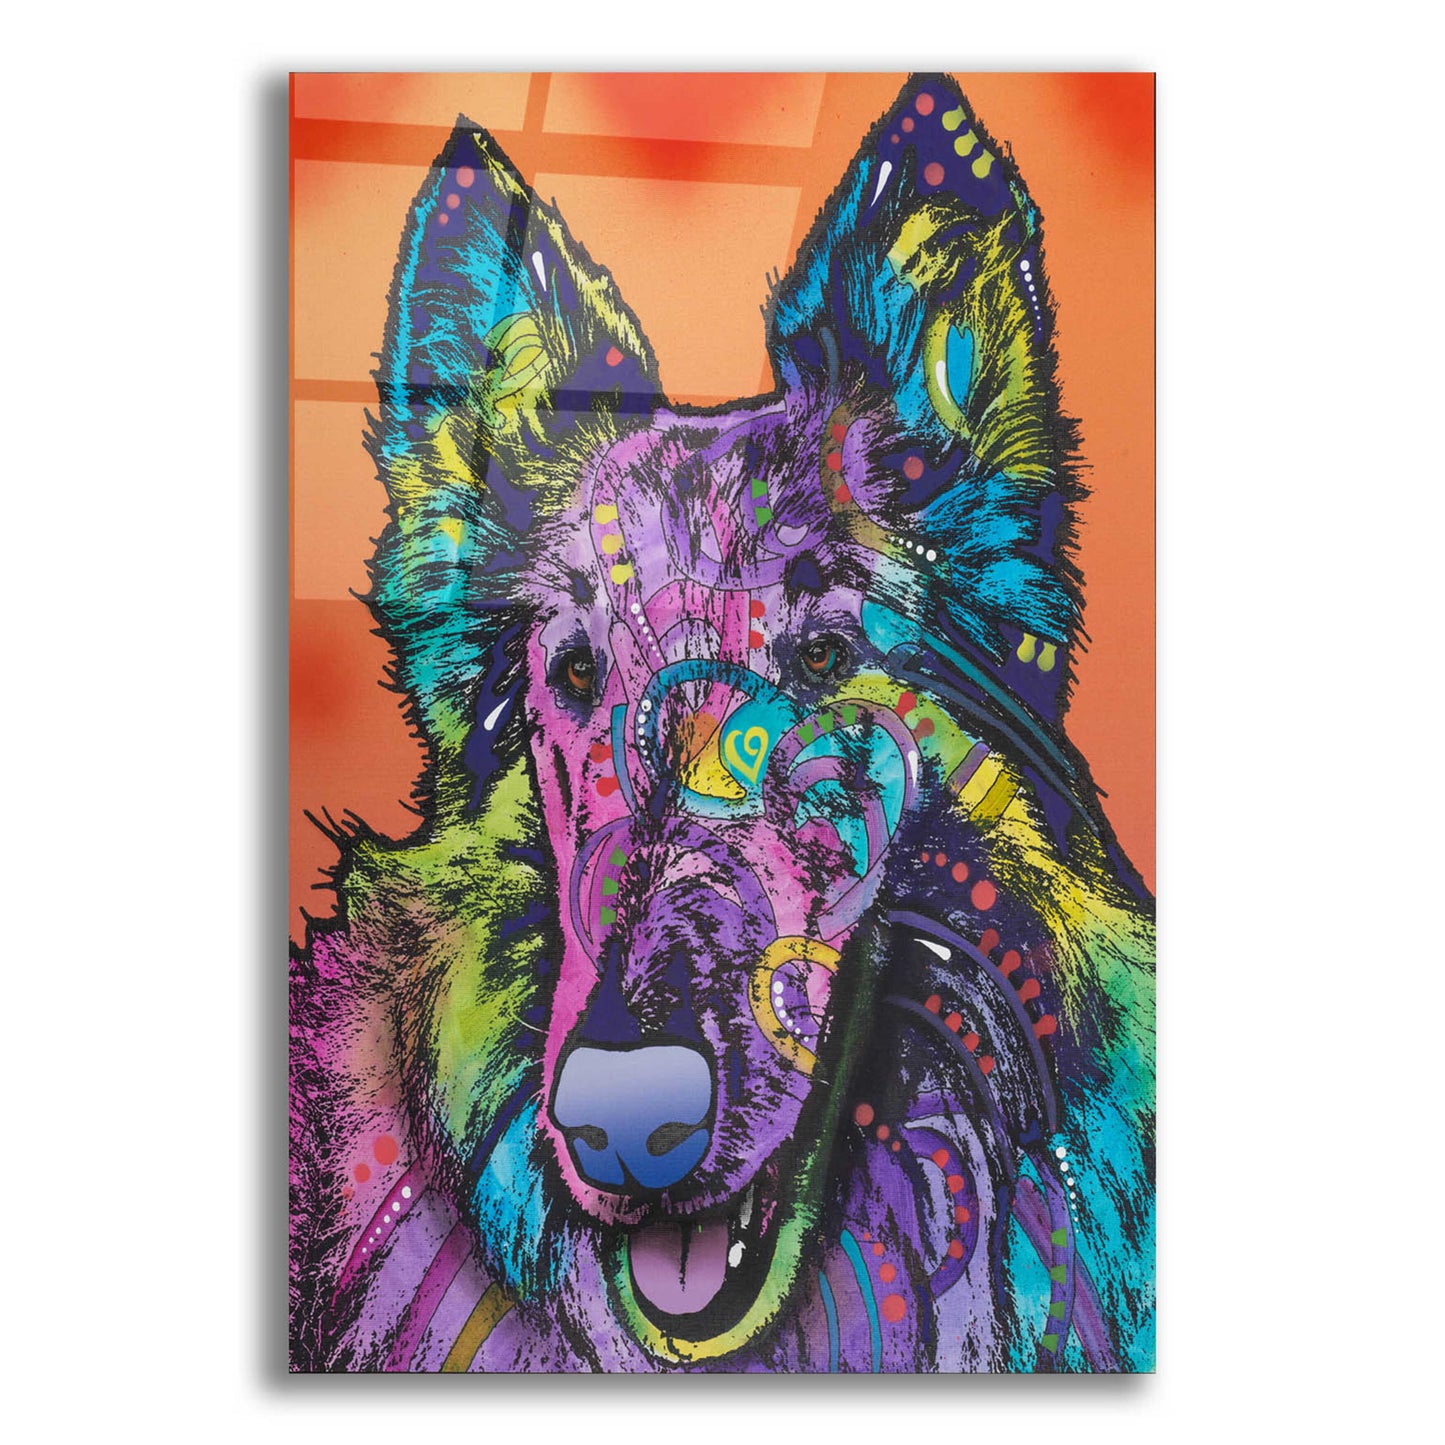 Epic Art 'Ava' by Dean Russo, Acrylic Glass Wall Art,12x16